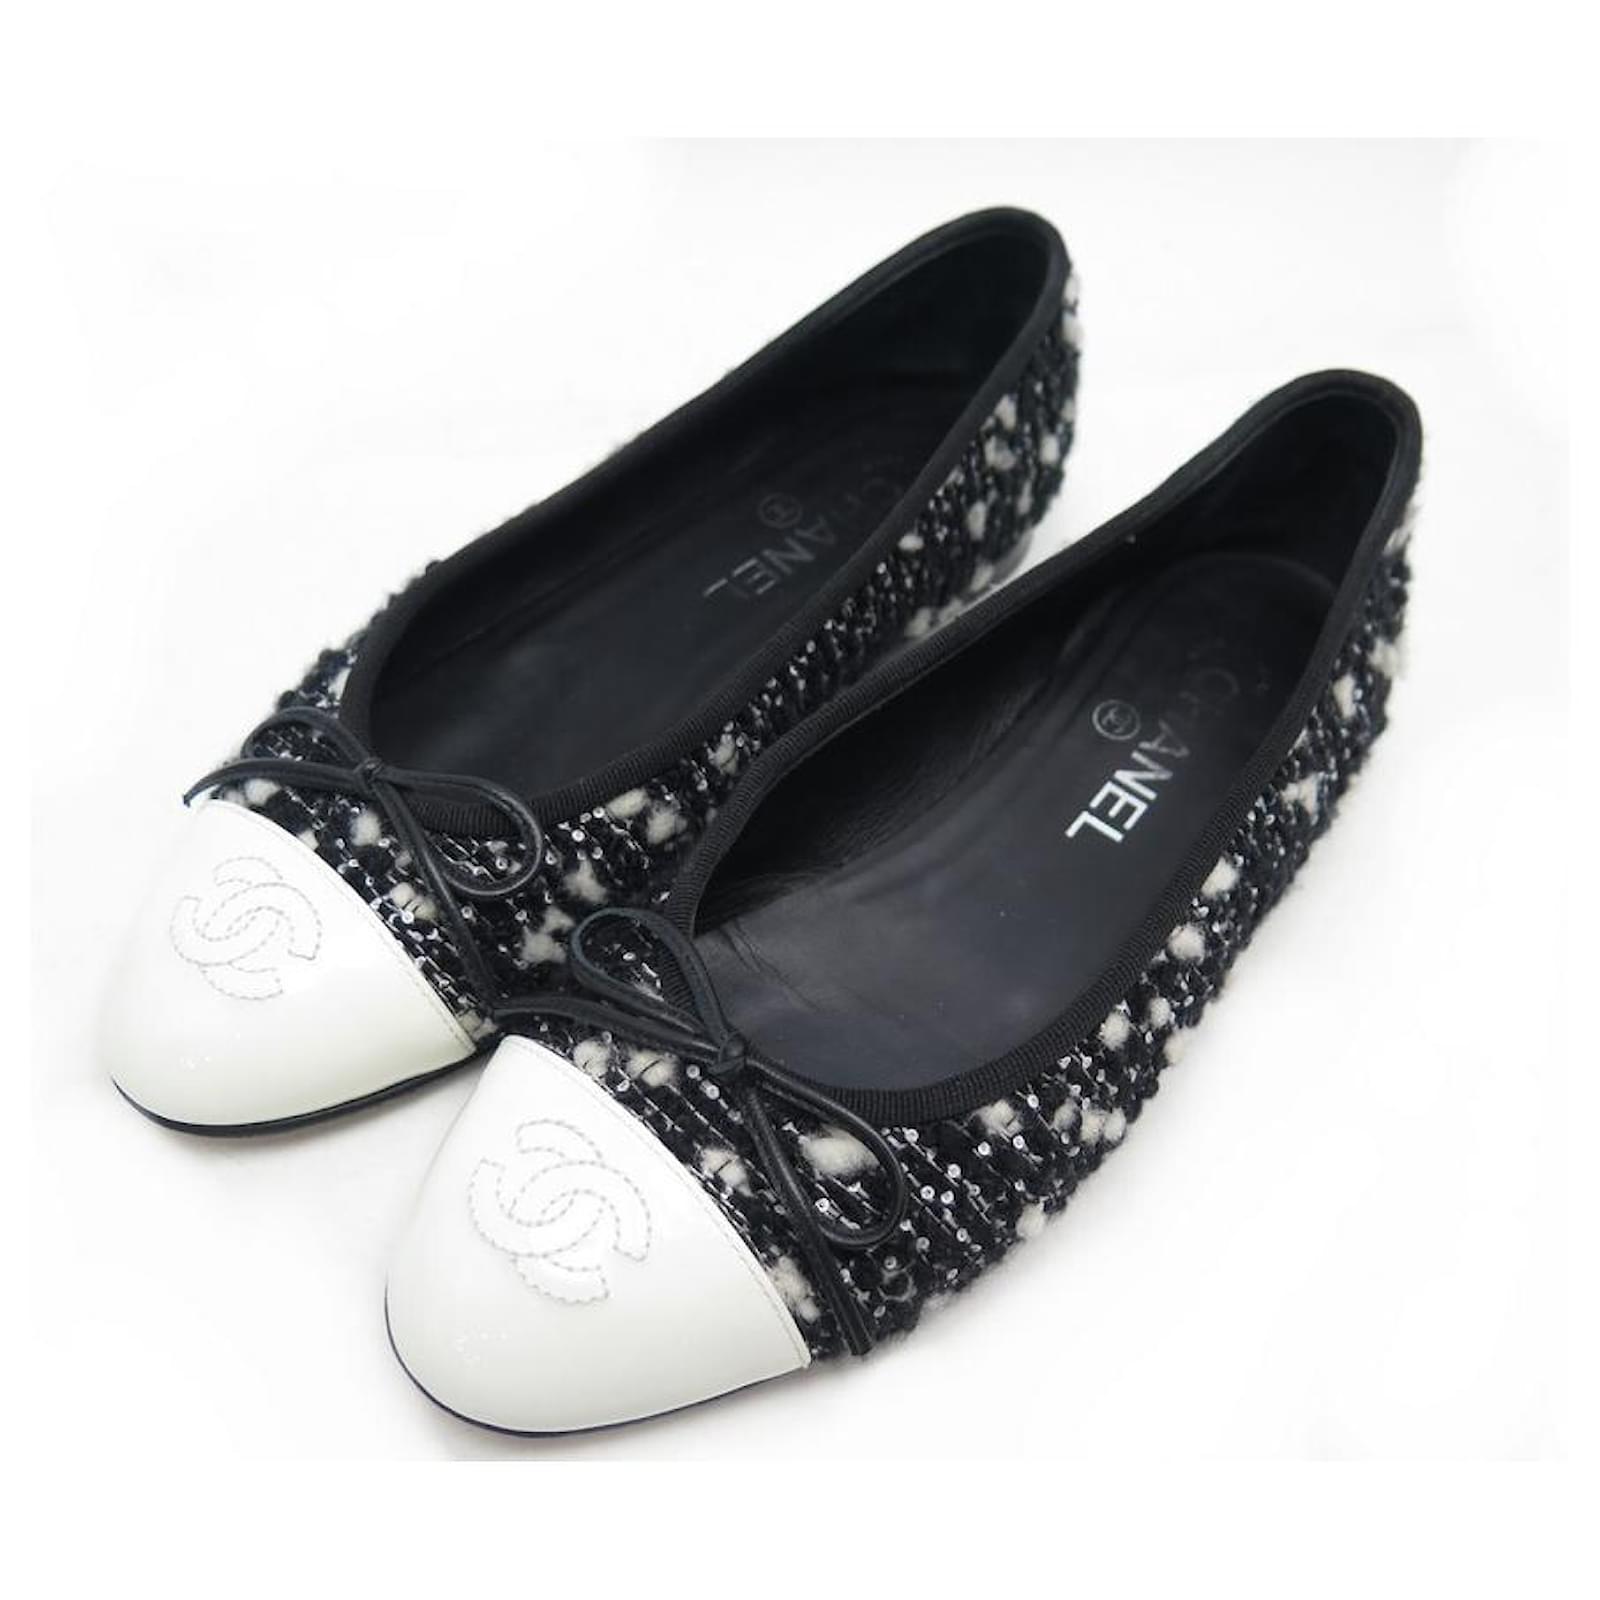 CHANEL G SHOES02819 37.5 BLACK AND WHITE TWEED BALLERINAS FLAT